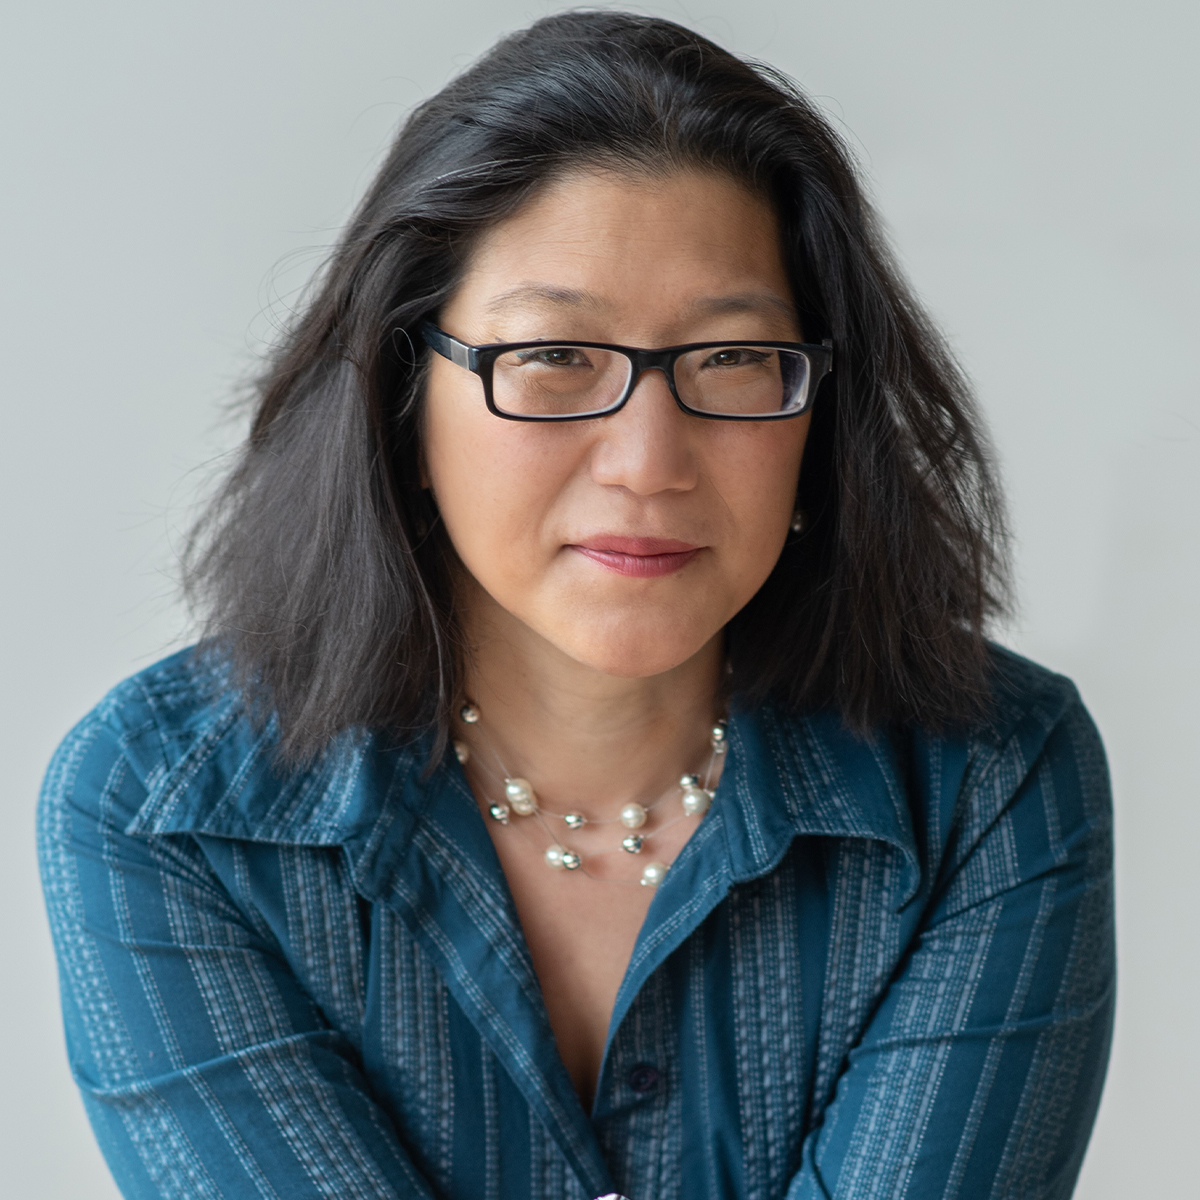 T. Susan Chang color portrait. T. Susan is a woman wearing dark-rimmed glasses, a pearl or beaded necklace, and a striped blue button-up top. She is posed in front of a neutral background.